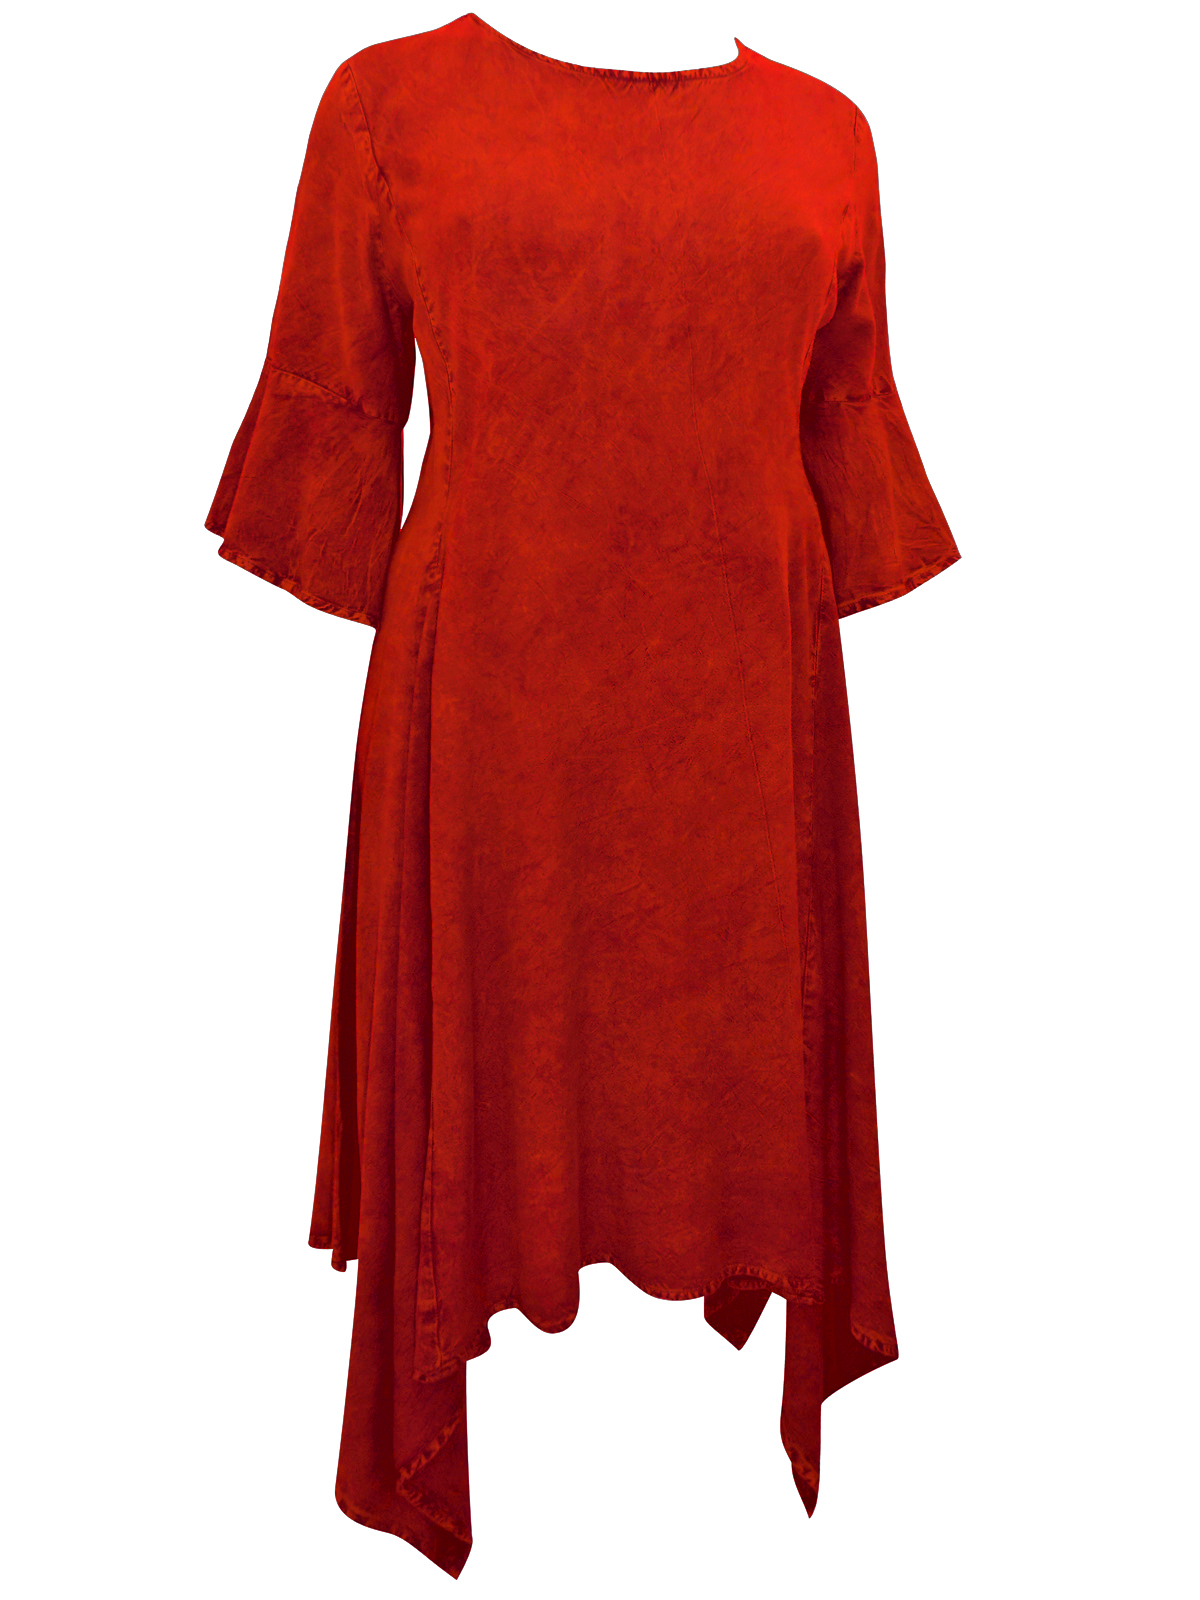 eaonplus RED Butter Soft Hanky Hem Mythical Ways Dress - Plus Size 18/ ...